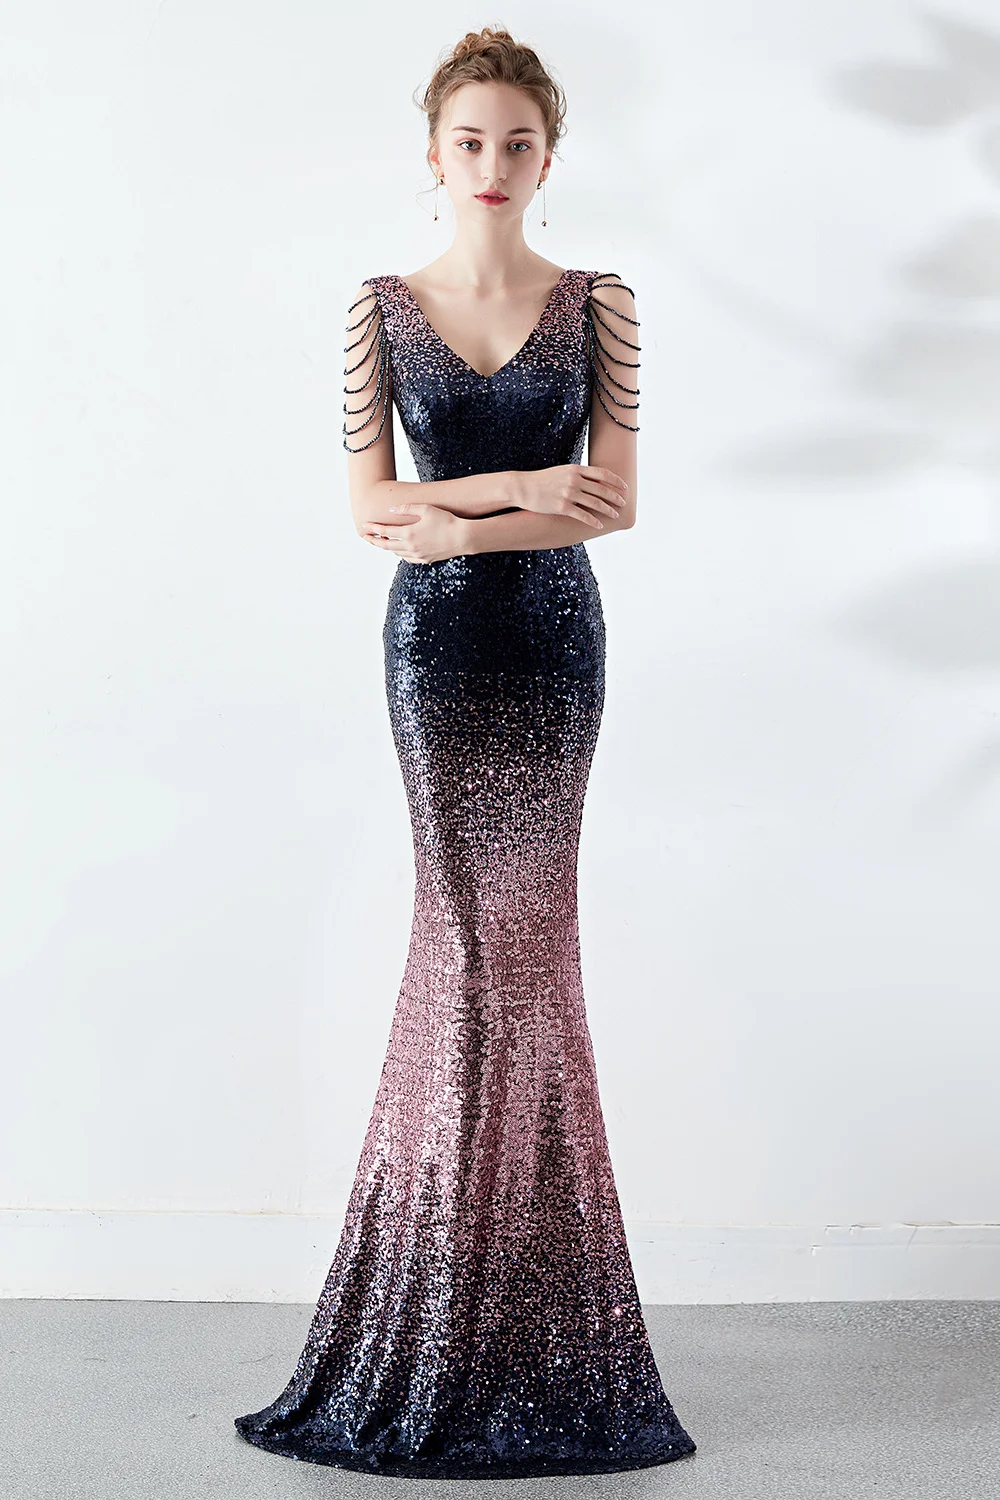 Gorgeous Ombre Sequins Mermaid Prom Dress Long Evening Gowns With Dropping Sleeve - lulusllly